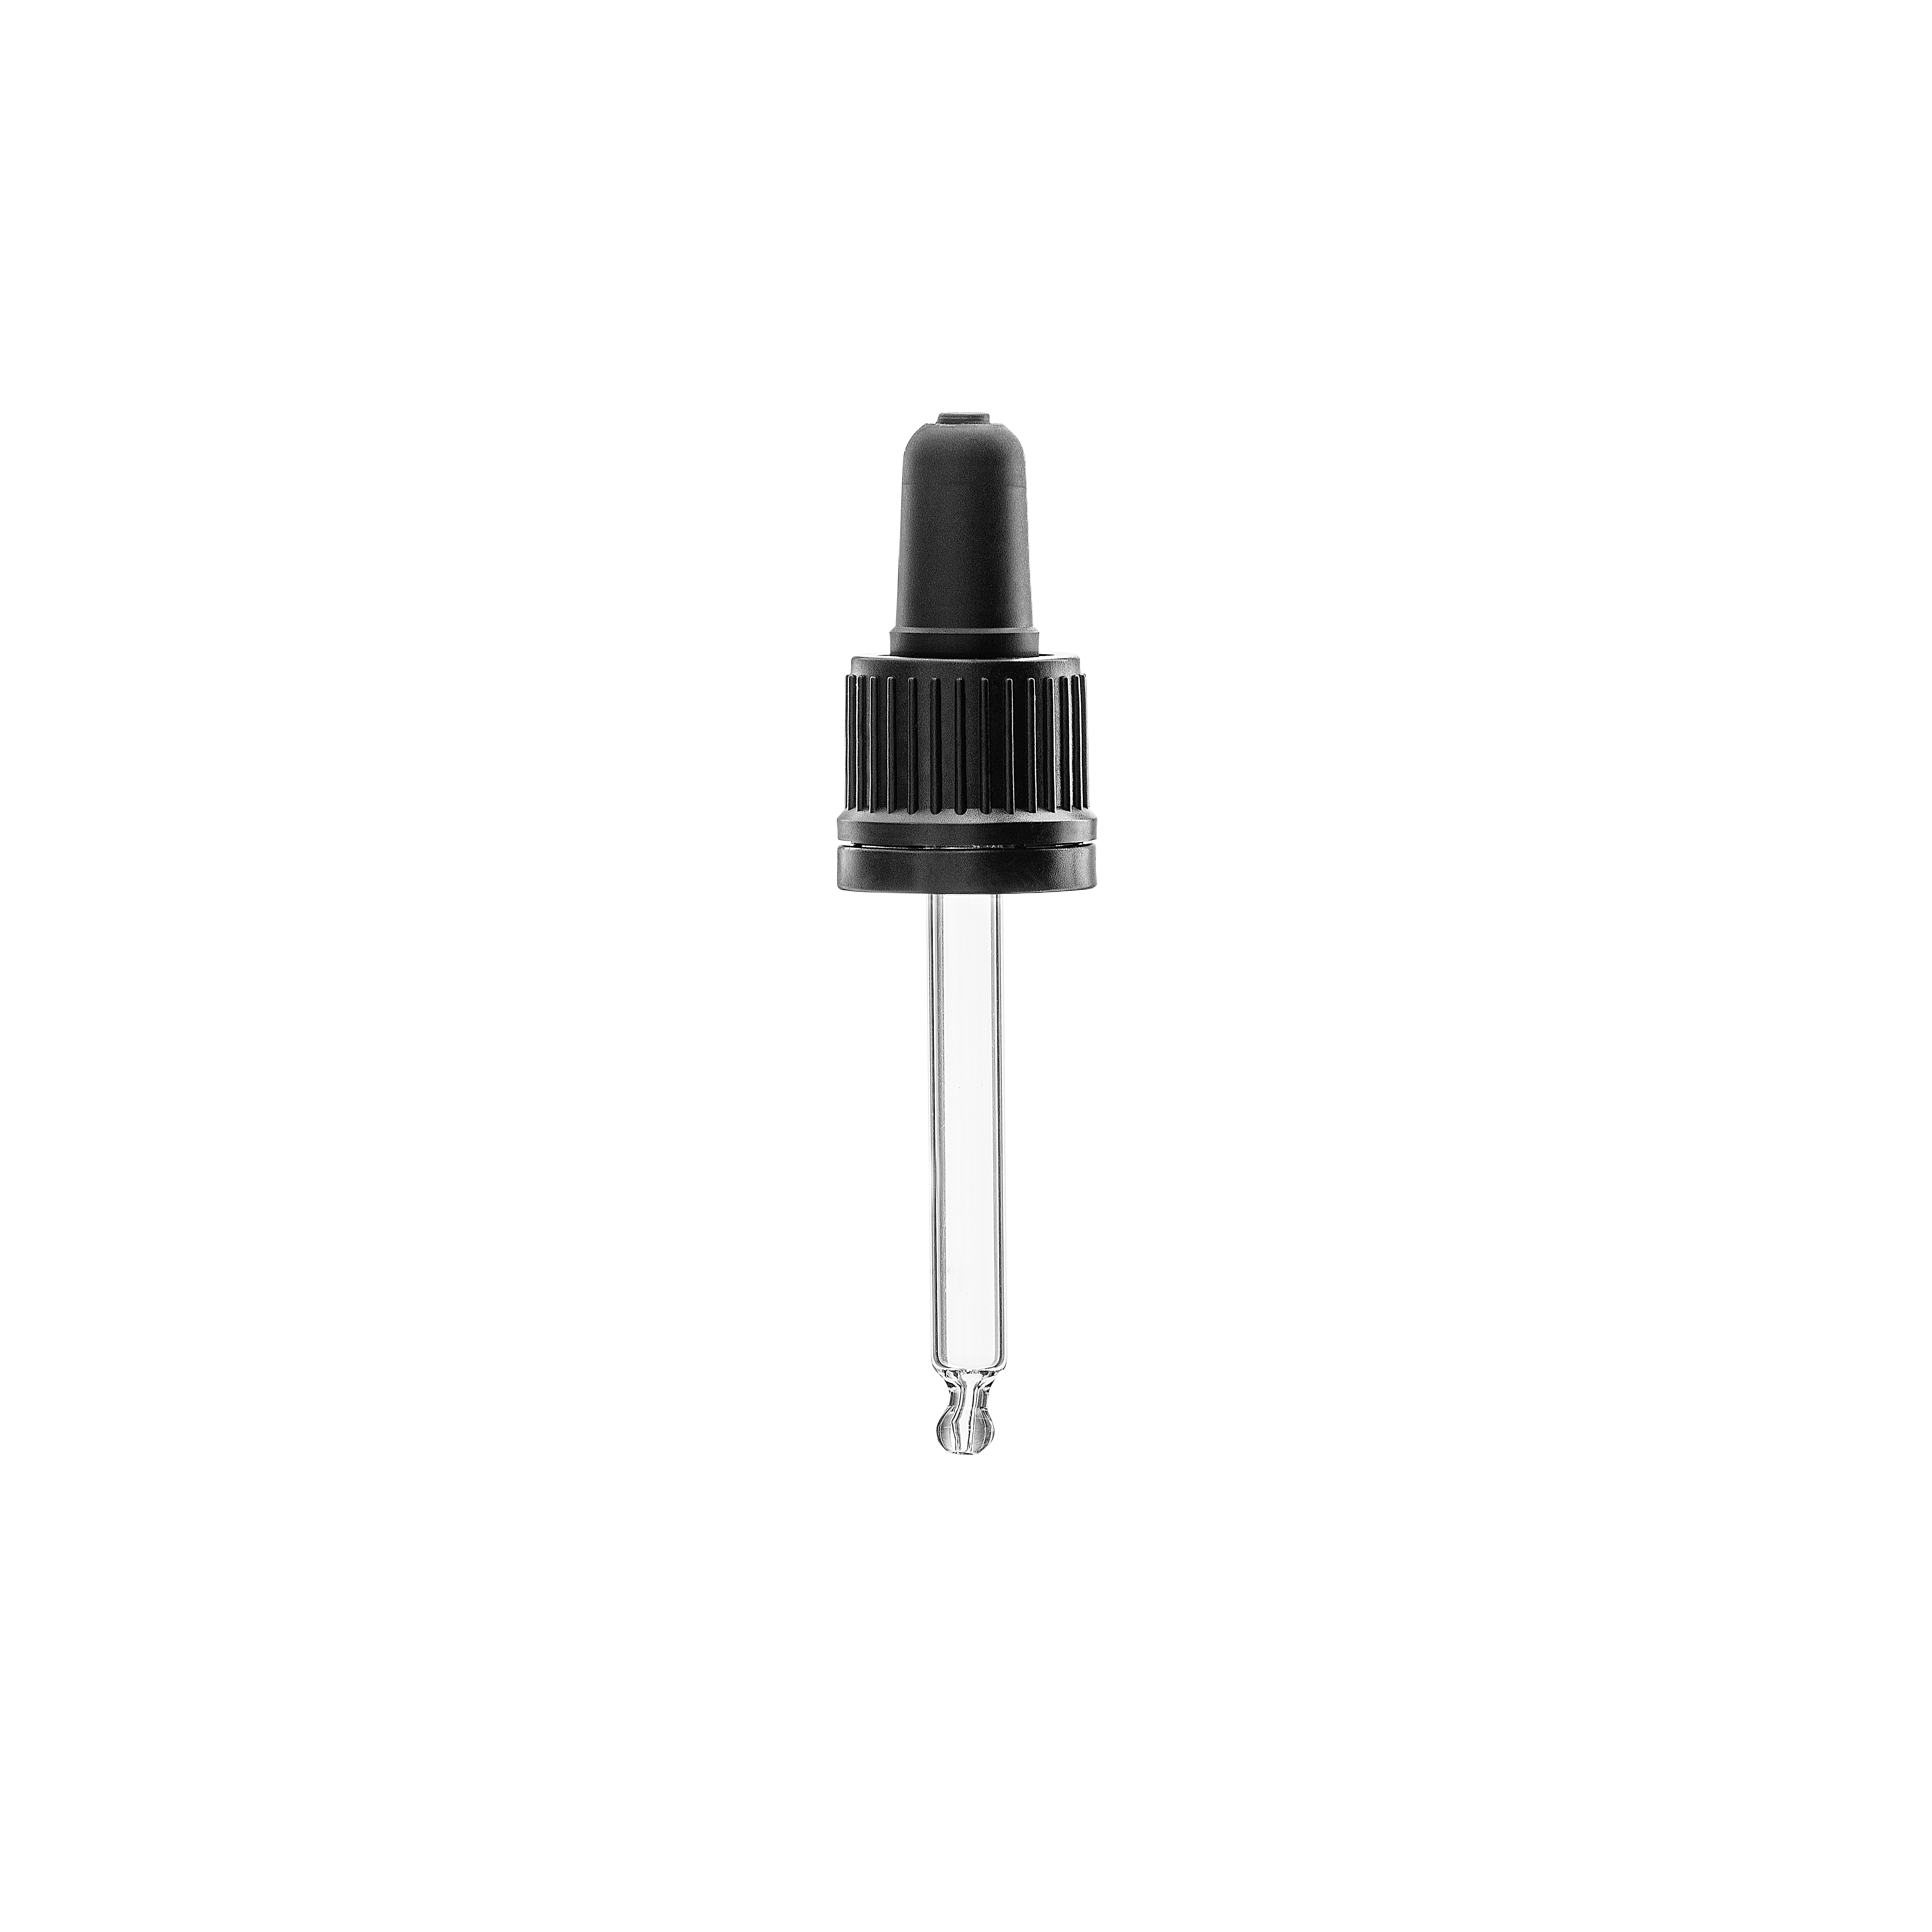 Pipette series II, DIN18, tamper-evident, PP, black, ribbed, black bulb TPE 0.7 ml, bent ball tip with 1.0 opening for Ginger 20 ml